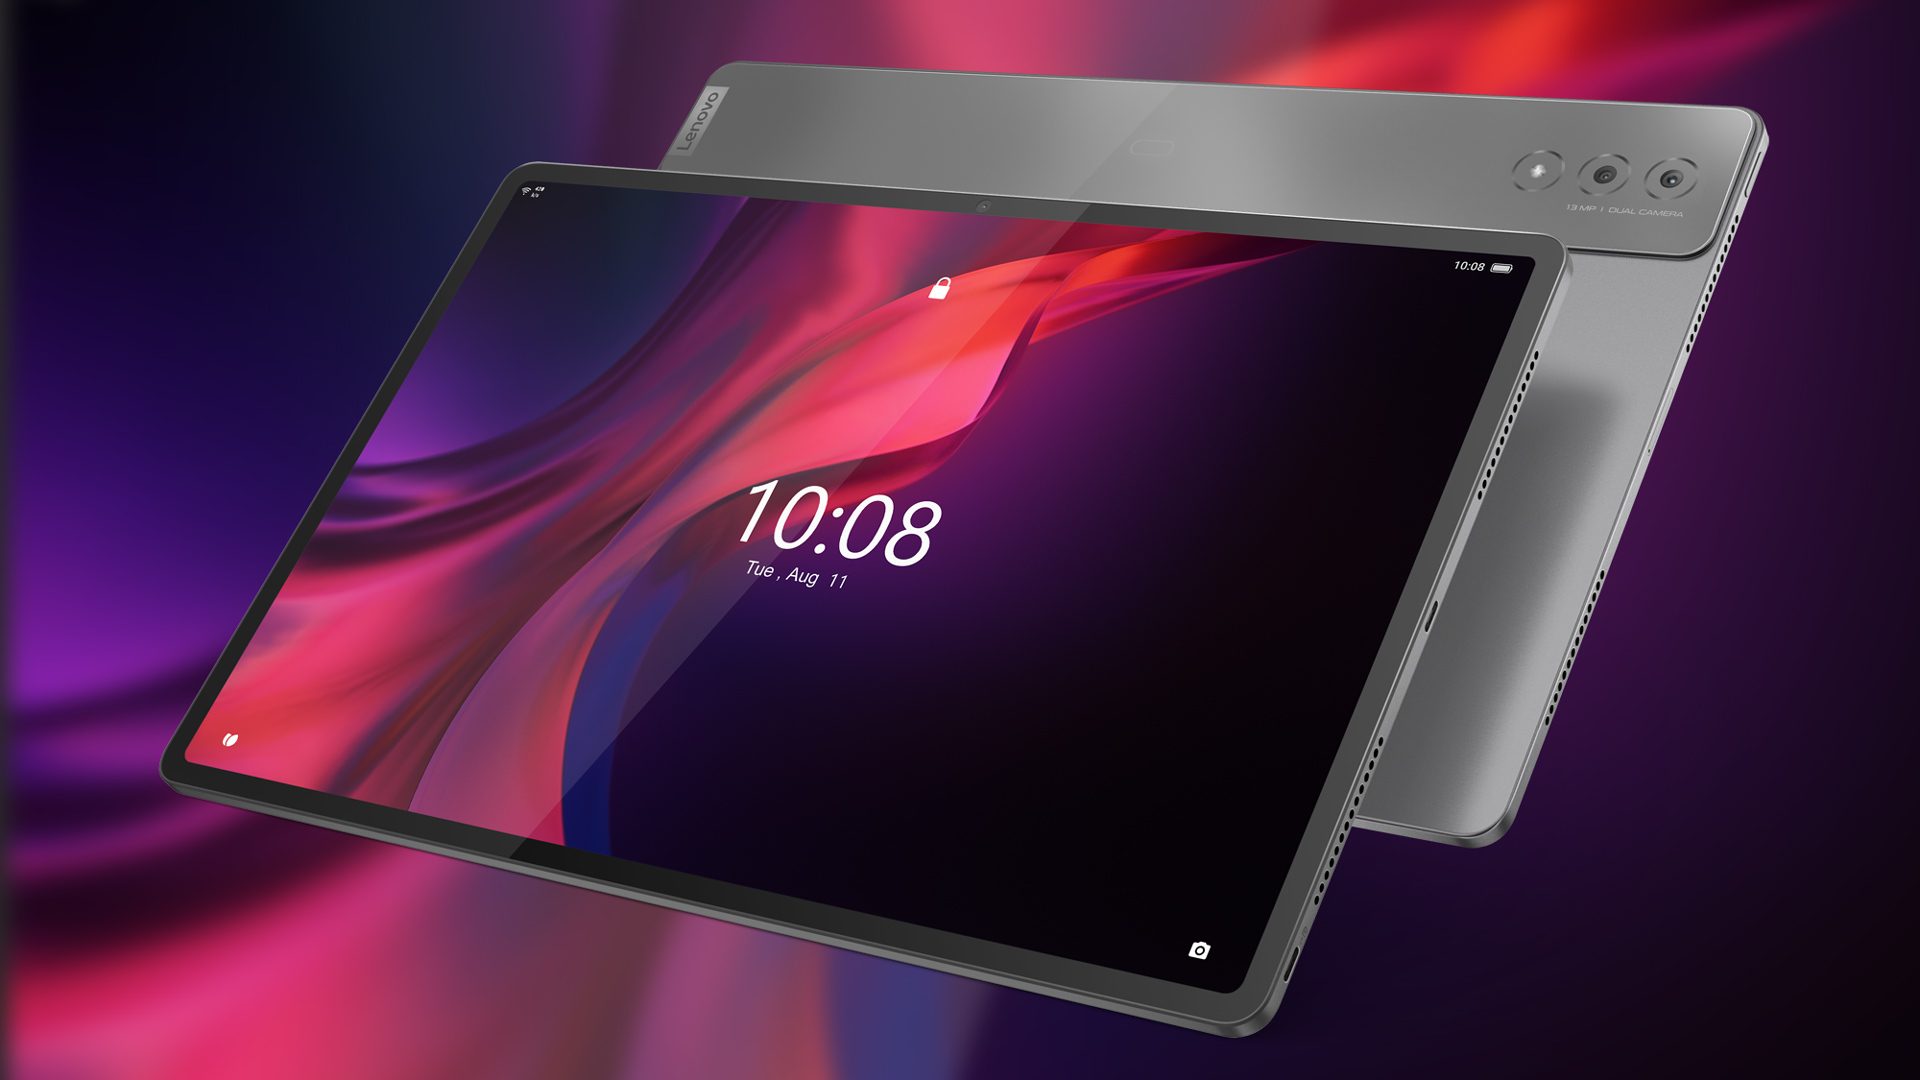 Lenovo Tab M10 - Tablette Android